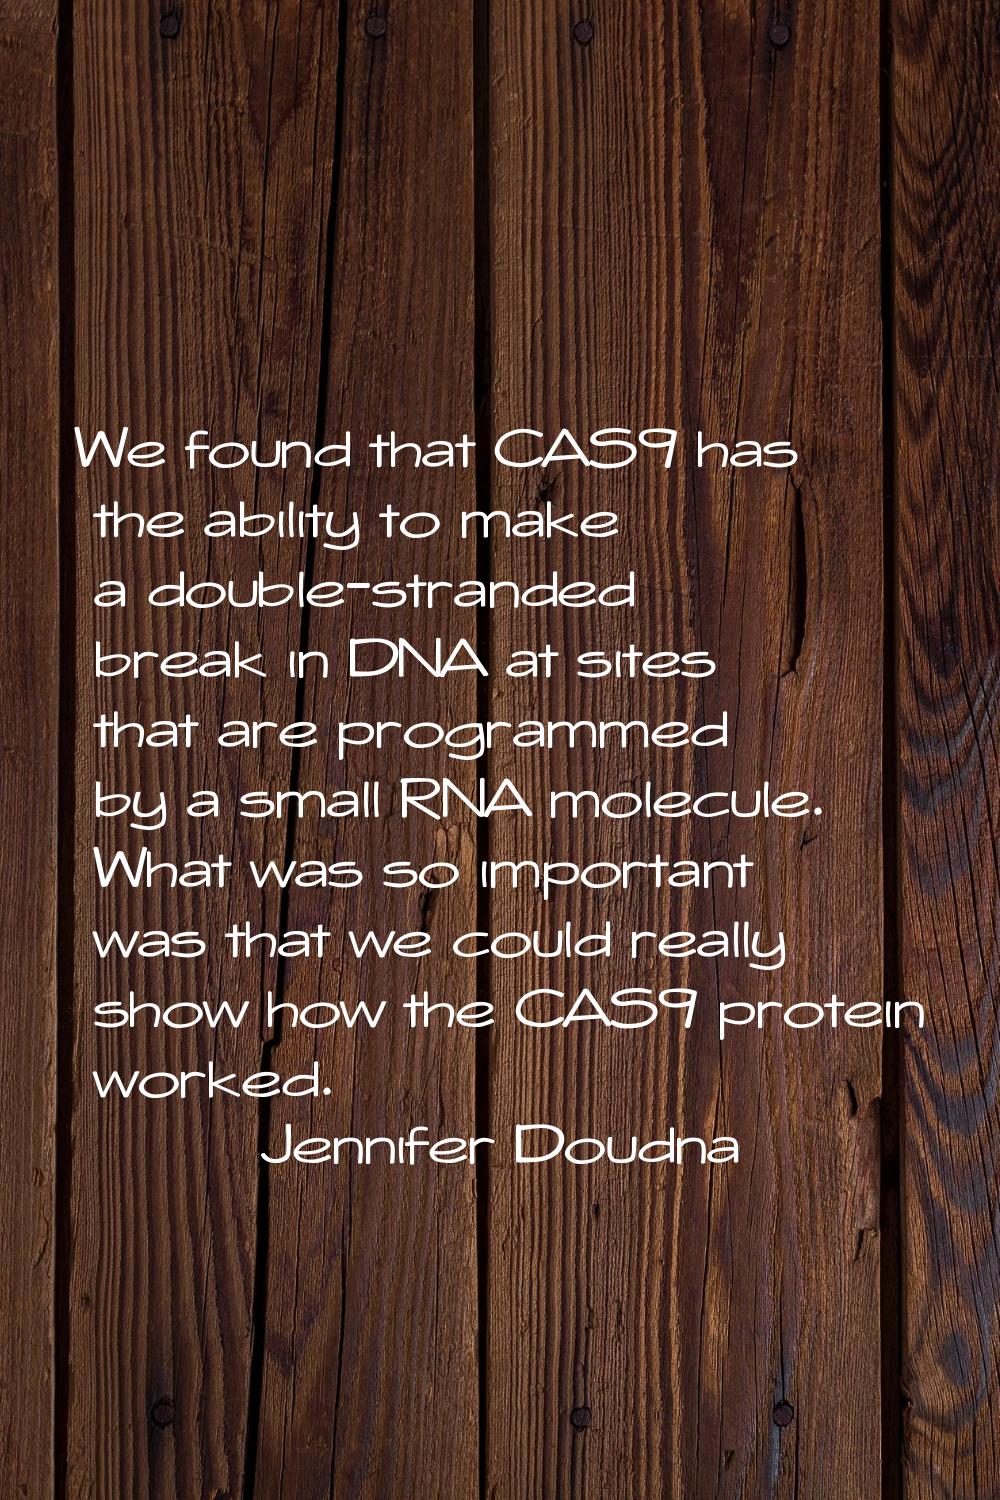 We found that CAS9 has the ability to make a double-stranded break in DNA at sites that are program